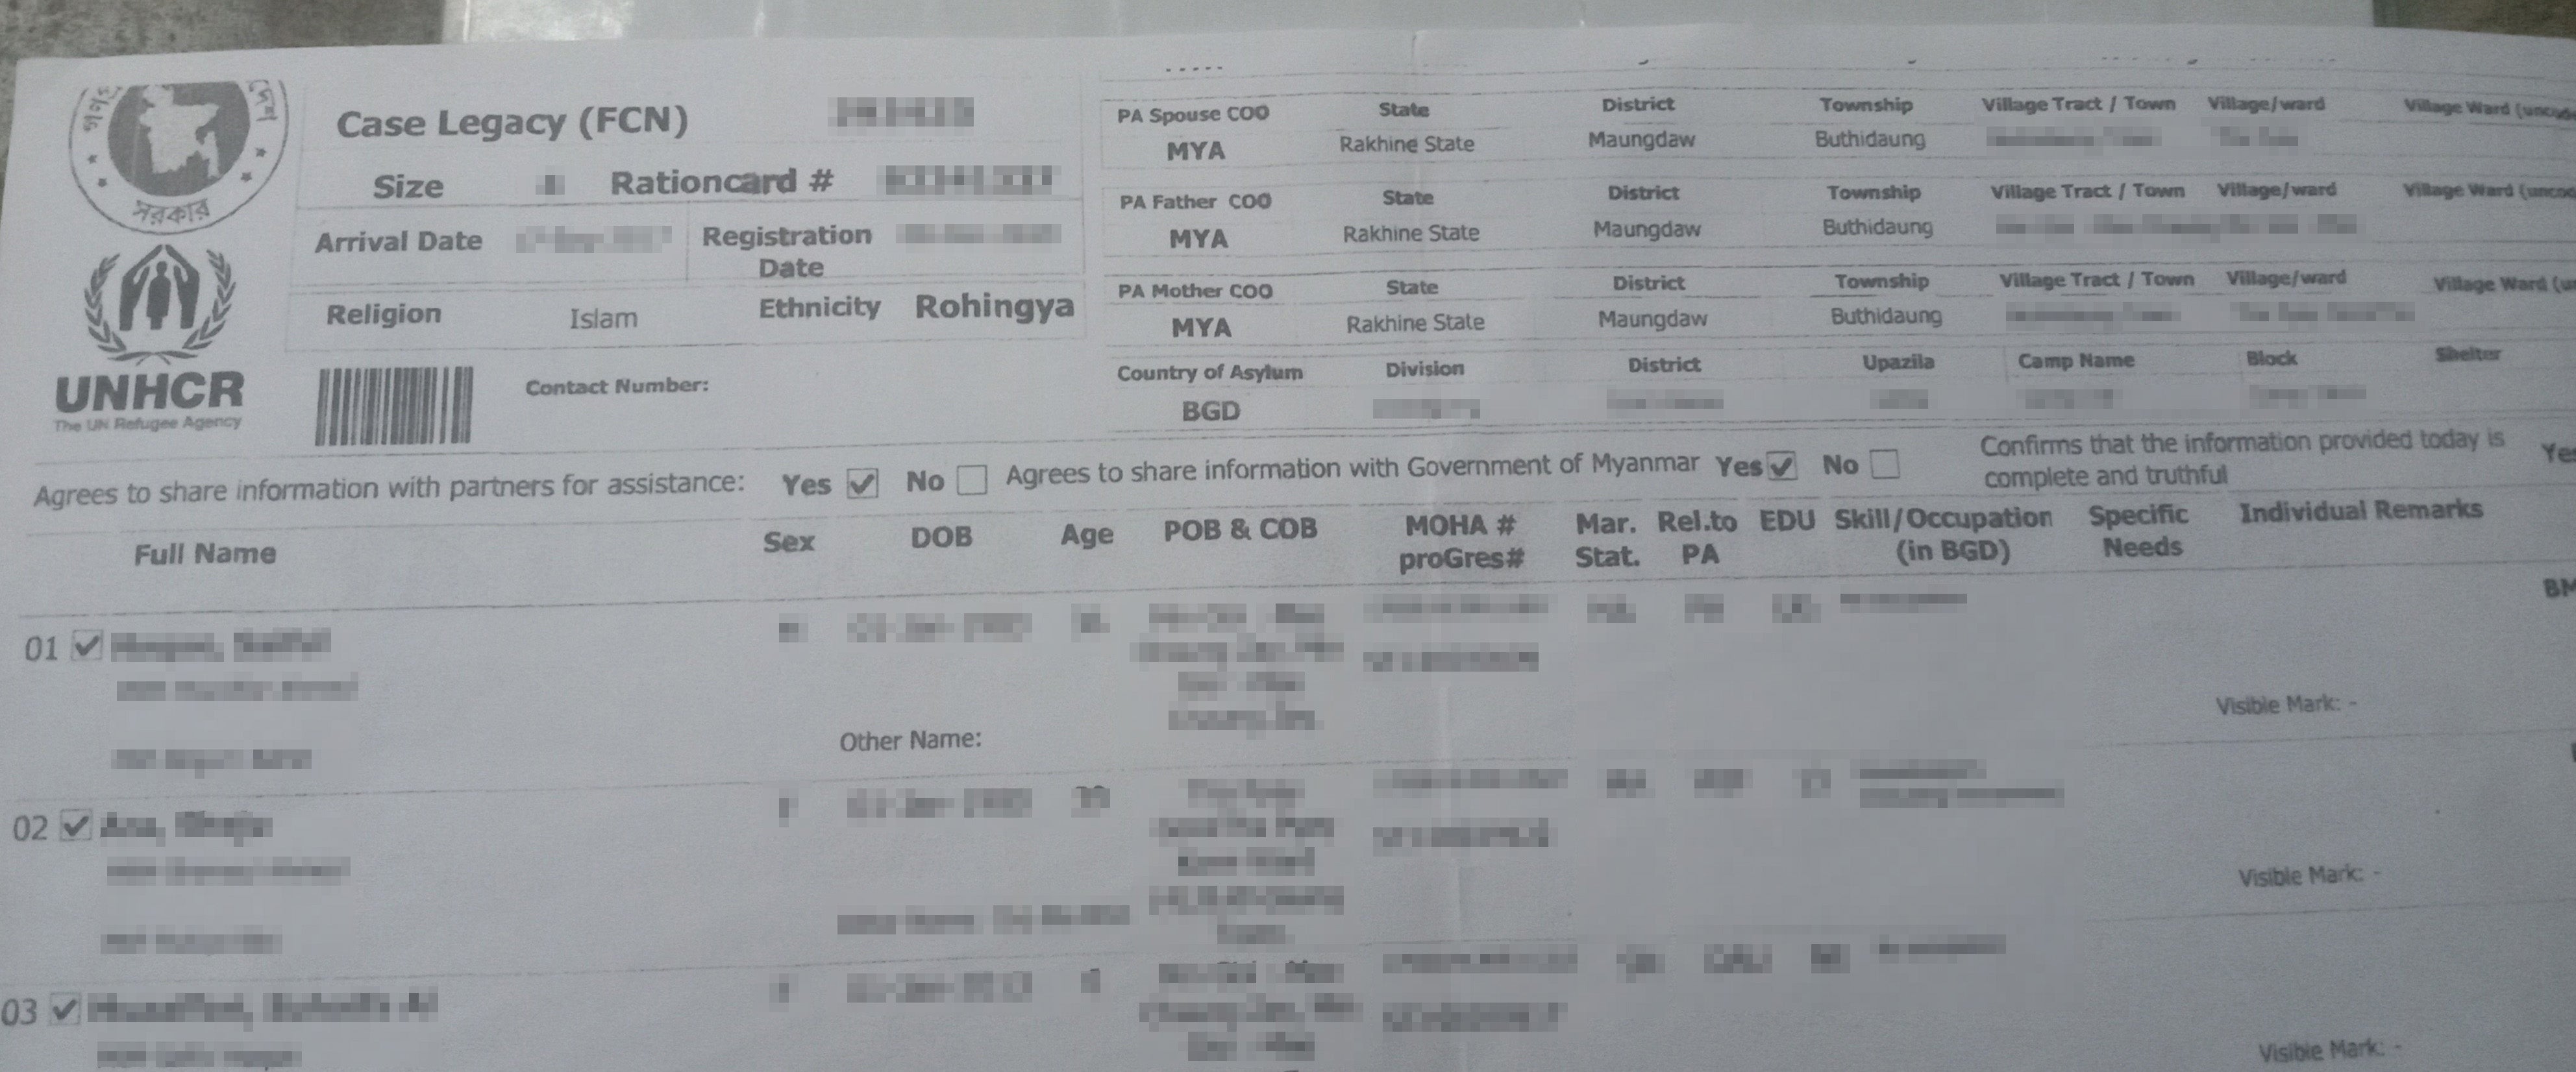 A photograph of the top of an English-language receipt that UNCHR staff gave to Rohingya after collecting their data as part of the 2018 joint registration process